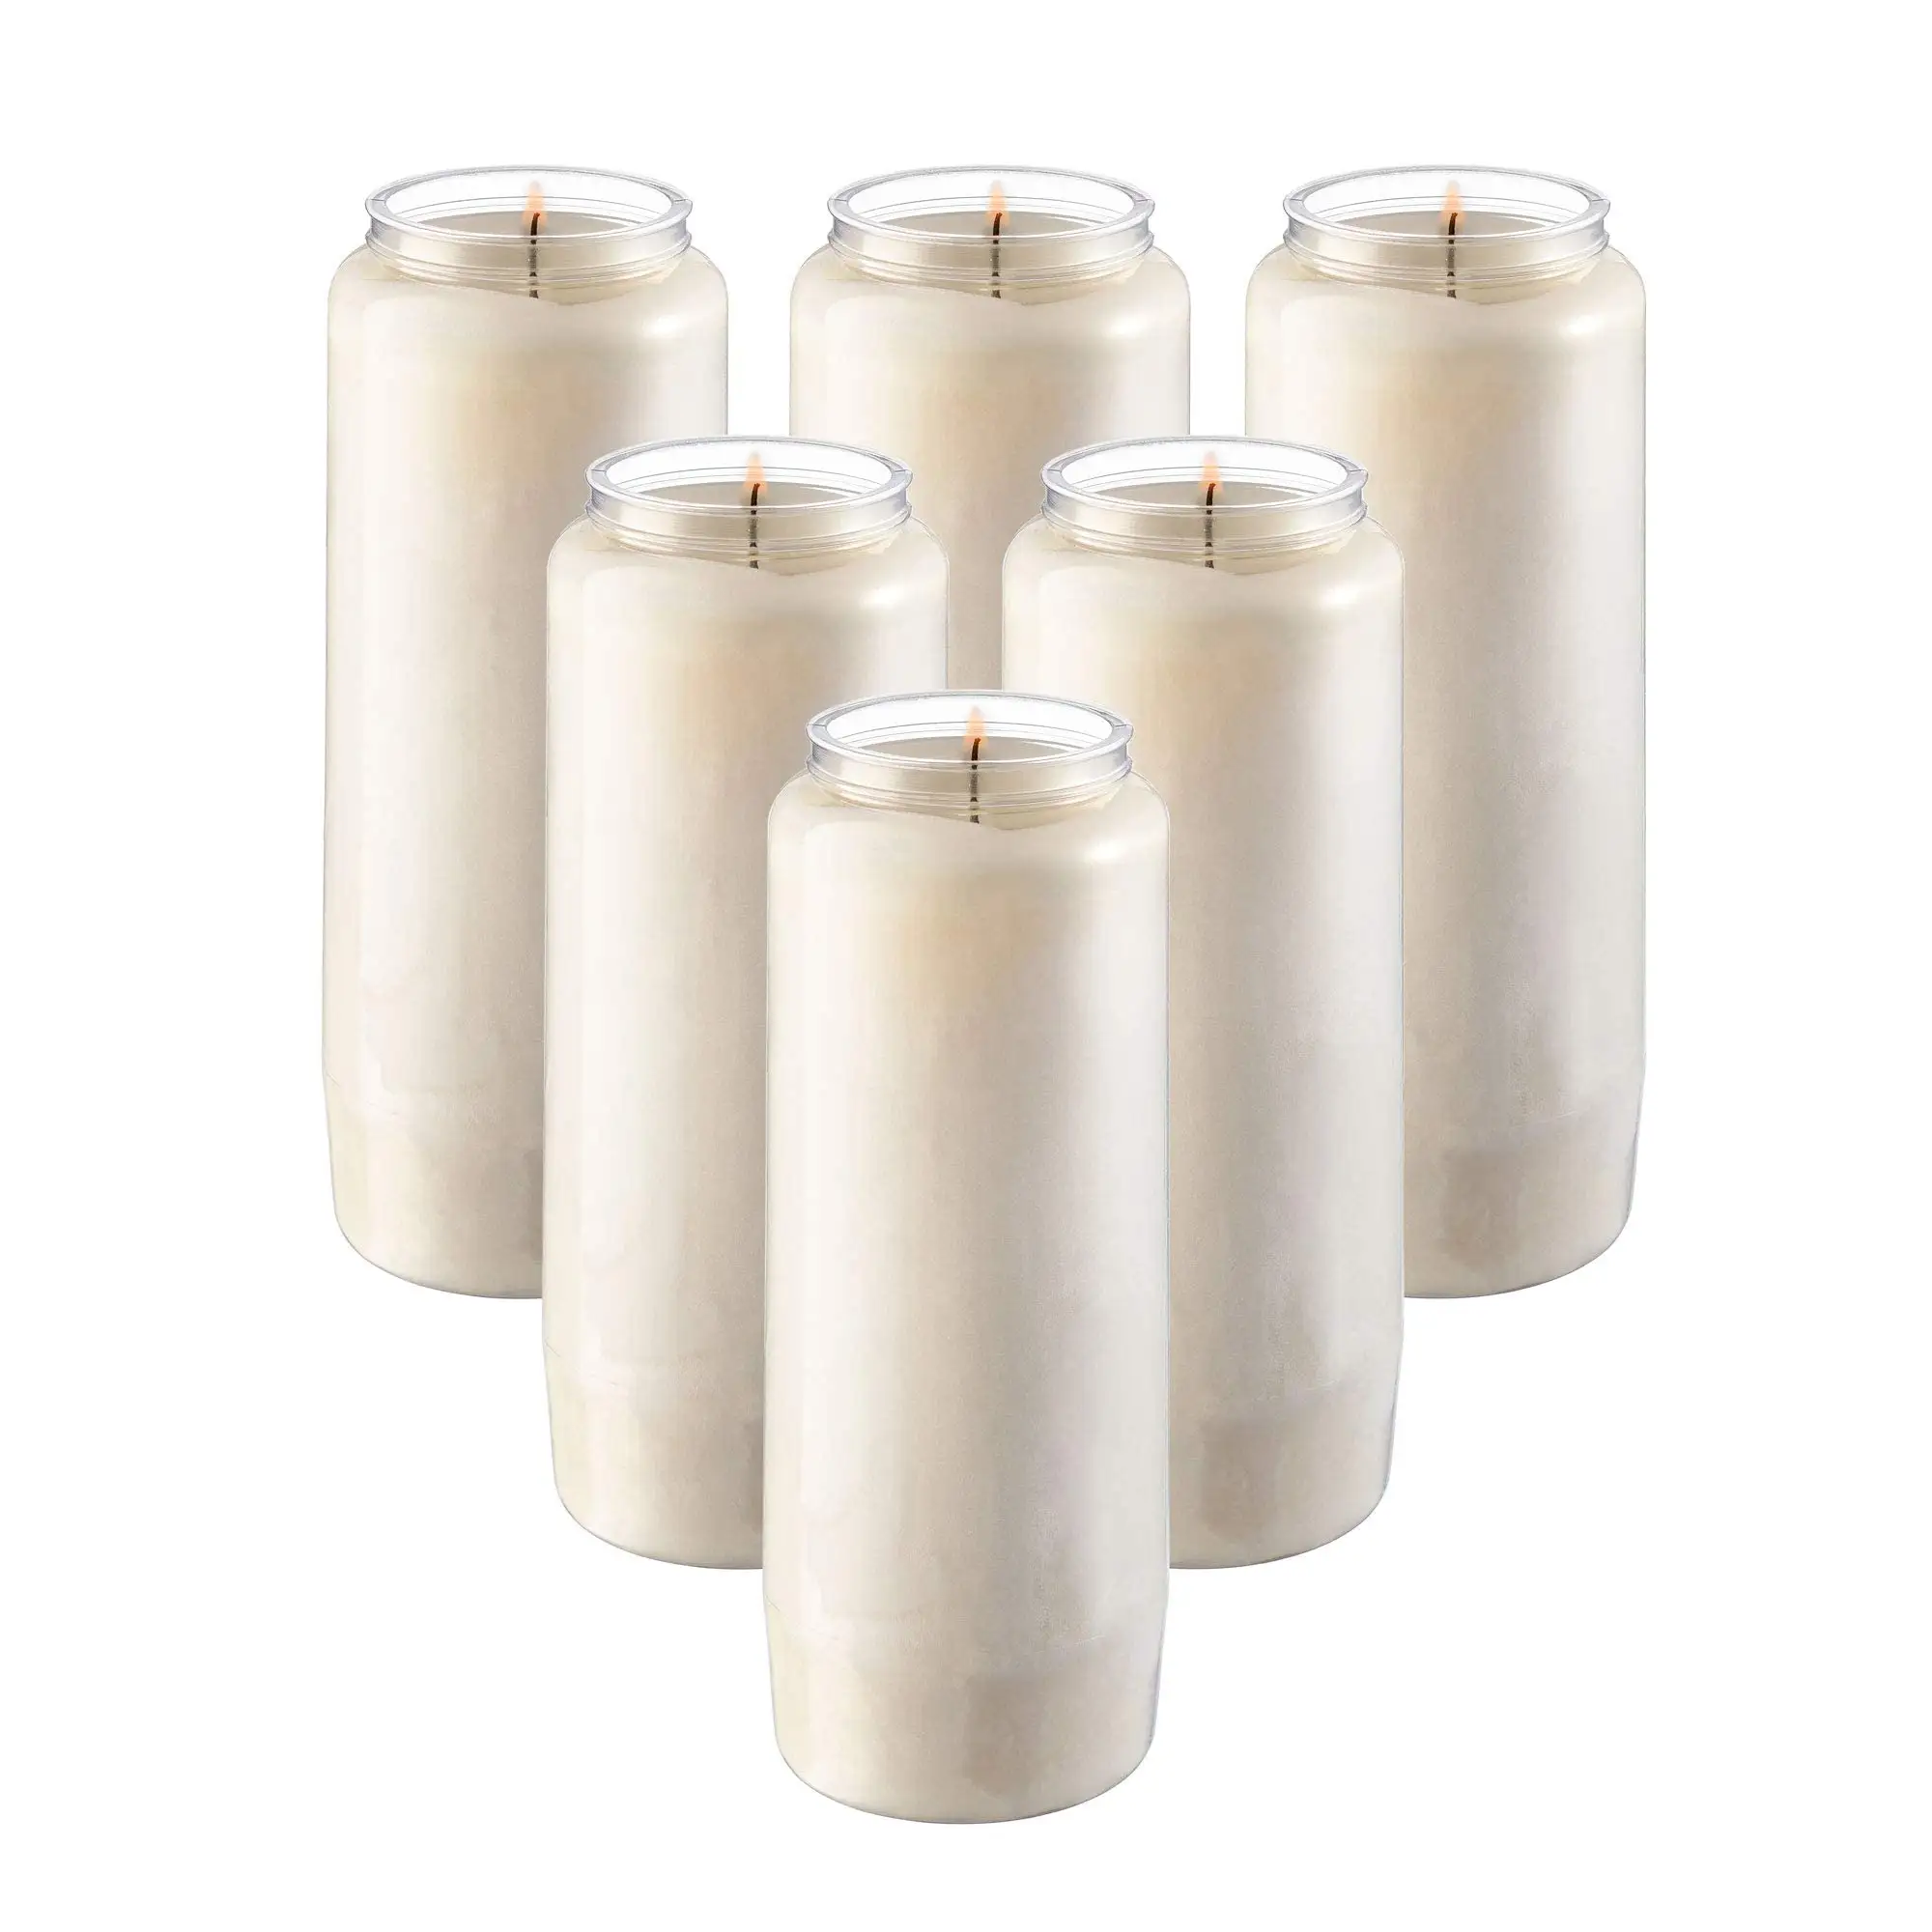 Hot Sale Wholesale White Color Prayer Votive Church Candle 7 Day Spiritual Religious Glass Candles